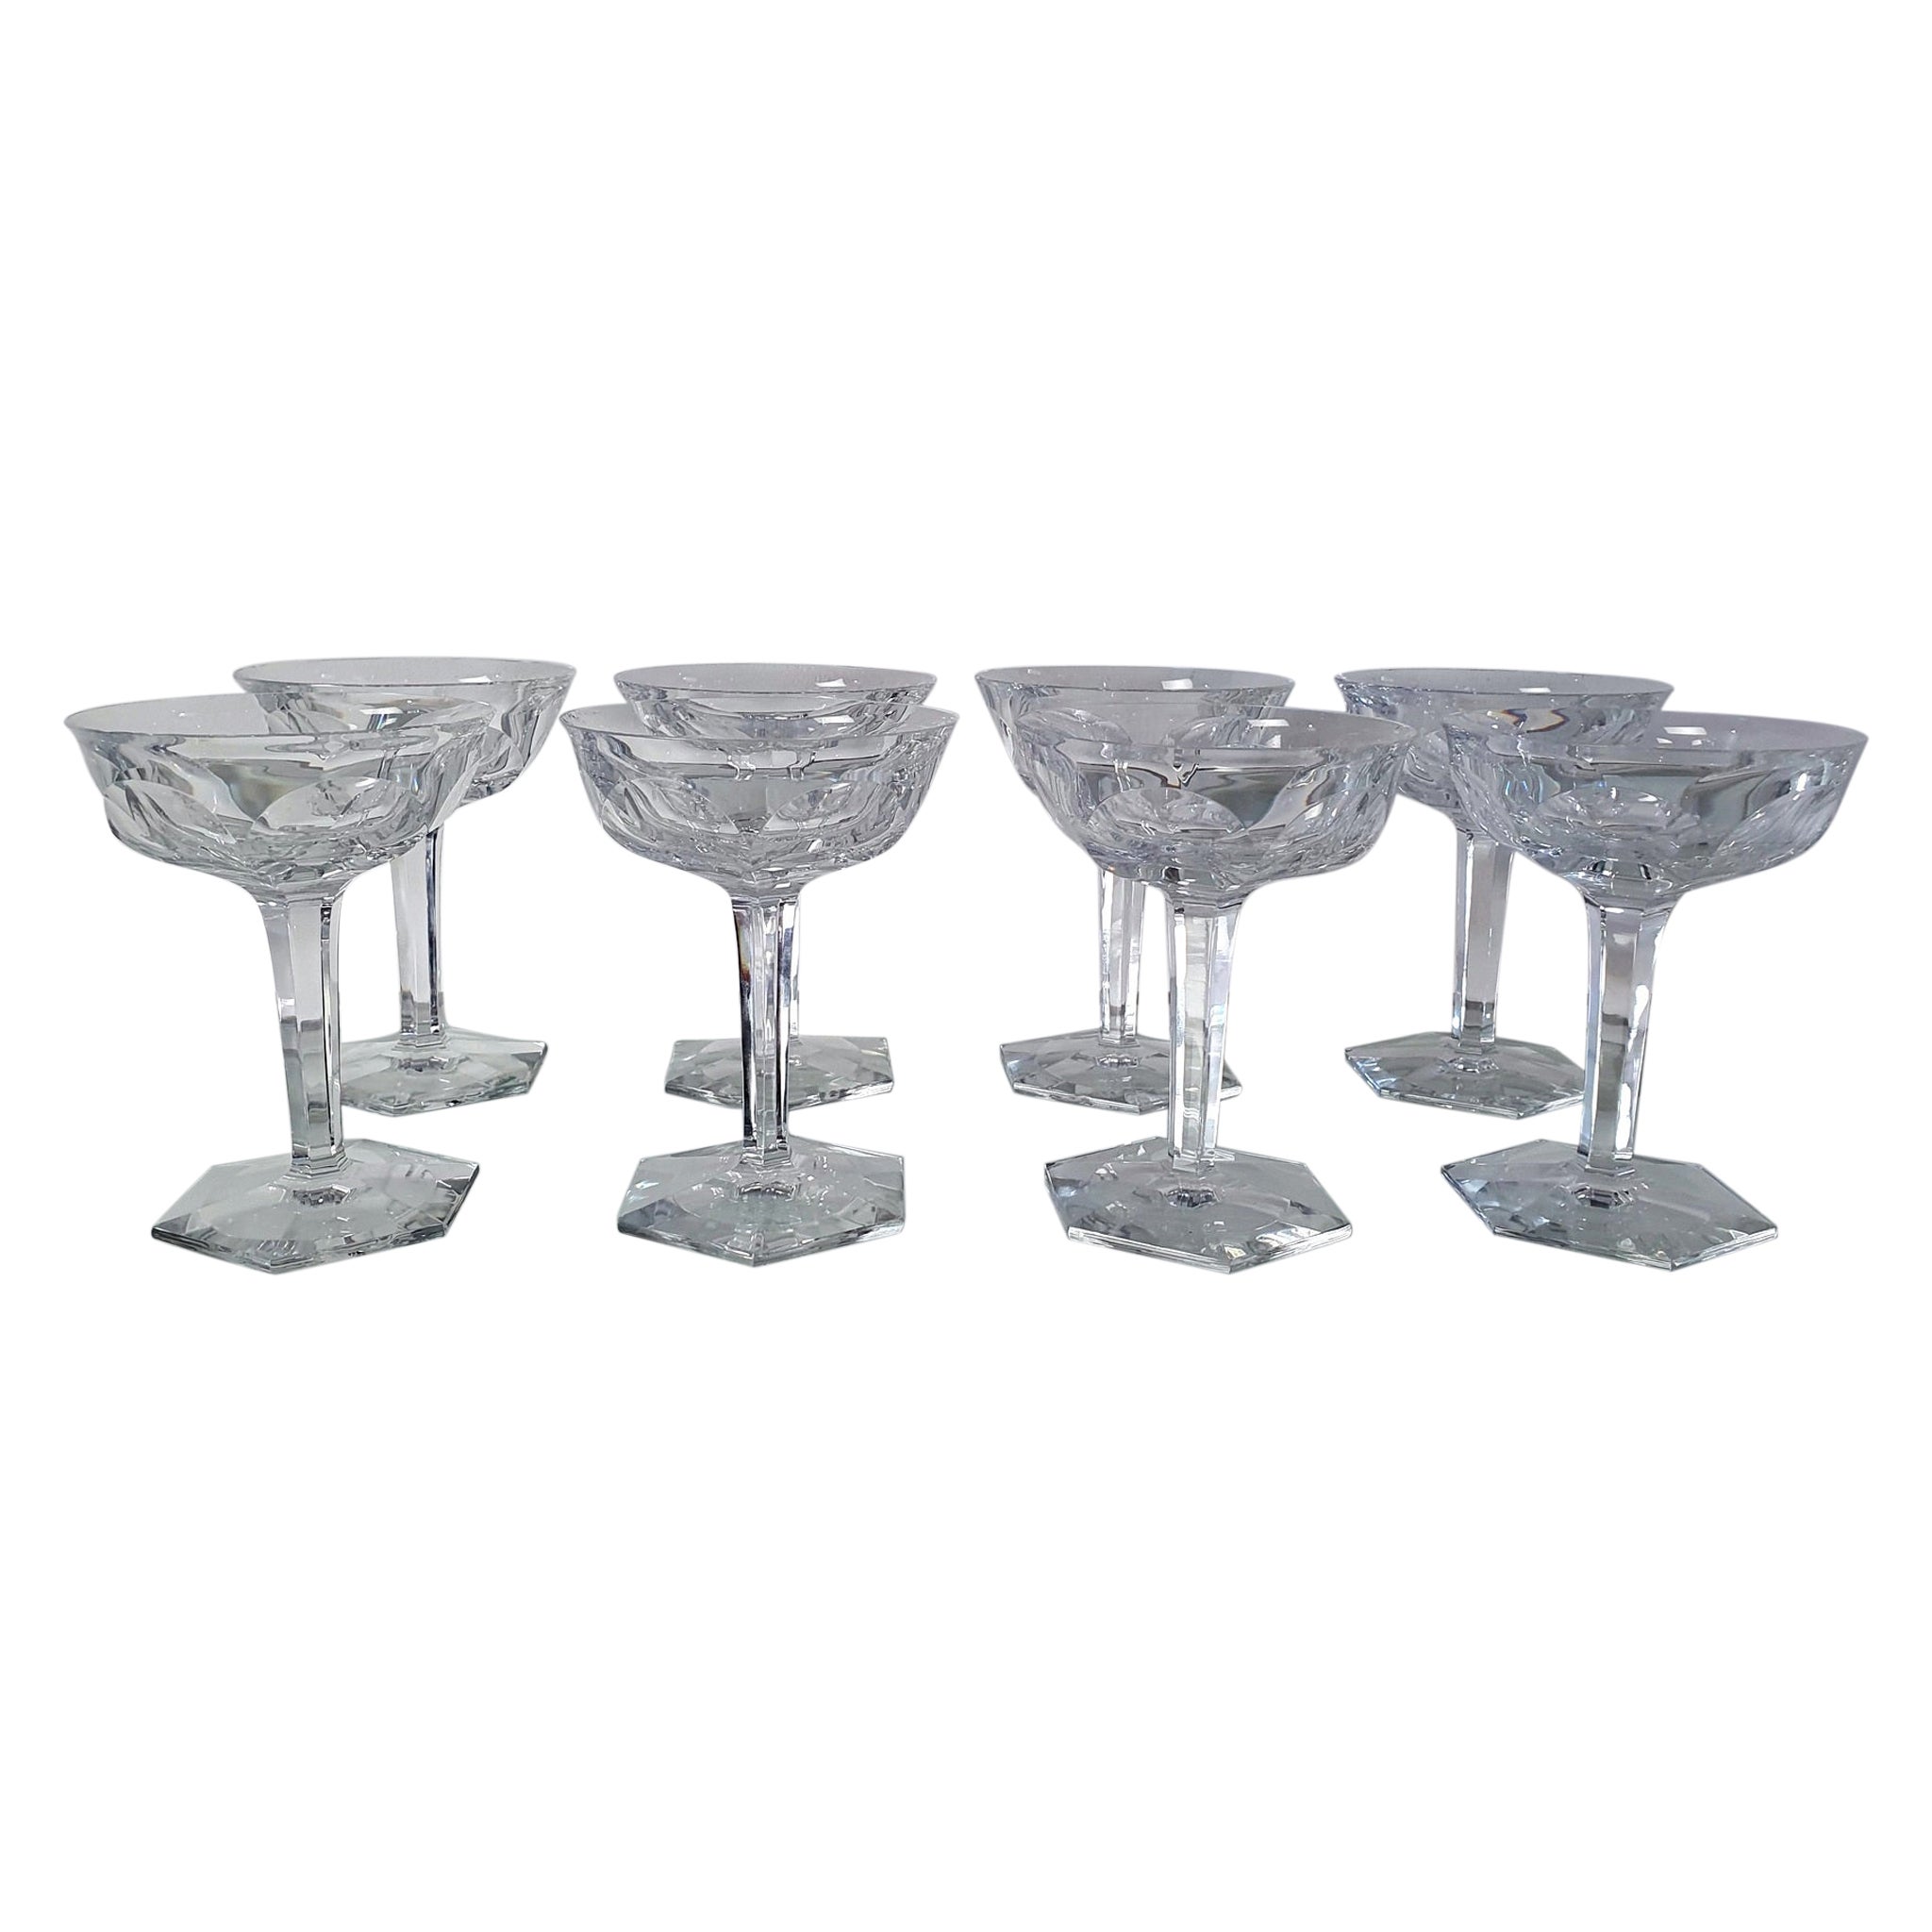 Baccarat Crystal Champagne Coupe Glasses Set of 8 For Sale